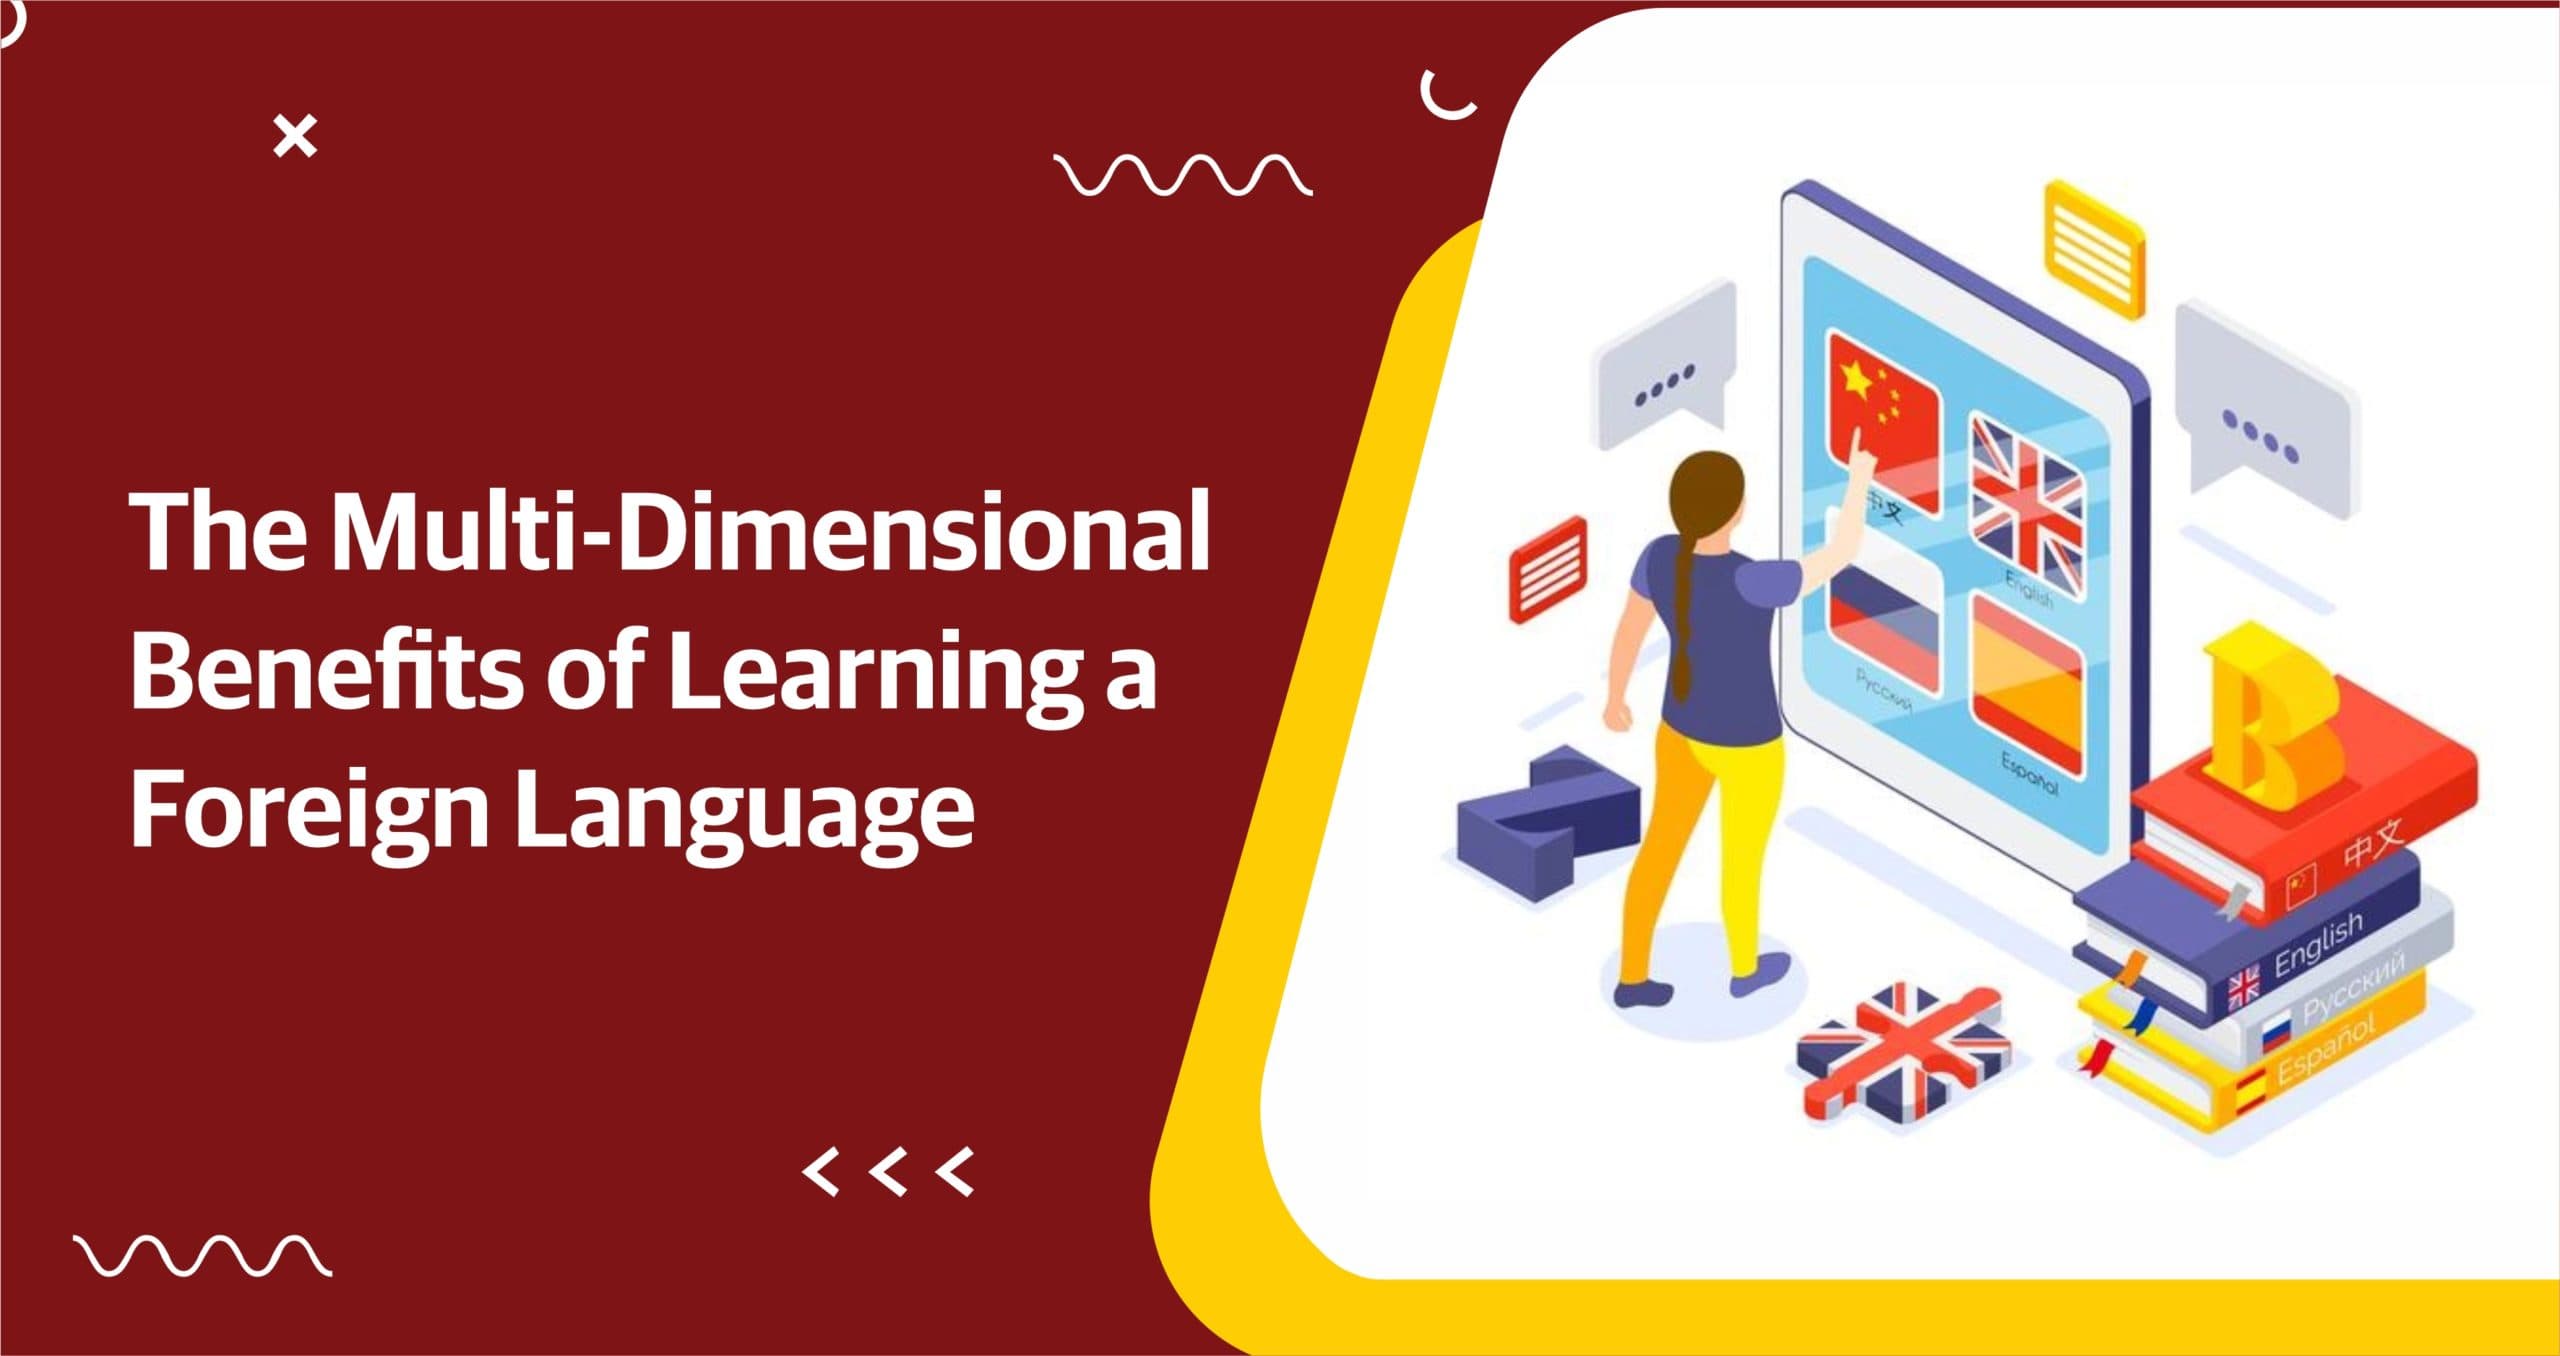 The Multi-Dimensional Benefits of Learning a Foreign Language